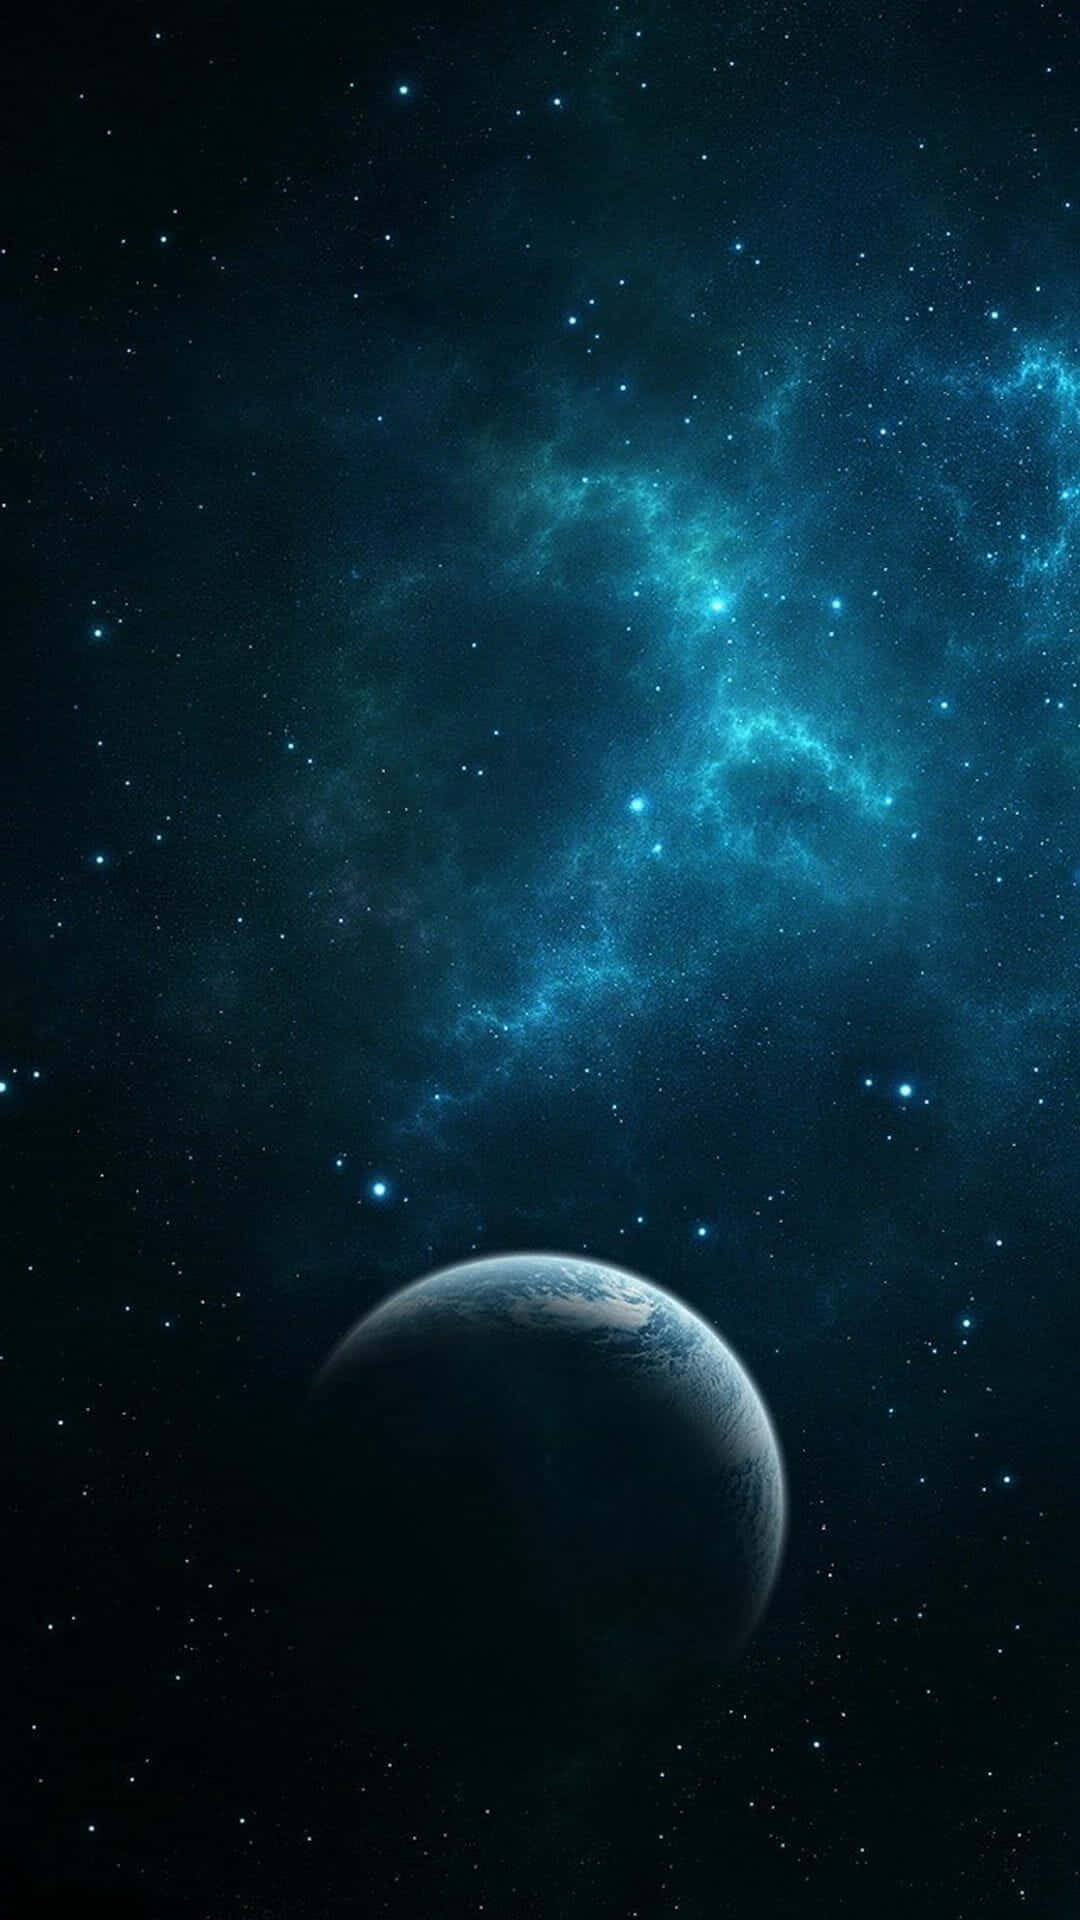 Space Wallpaper For Android 83 images